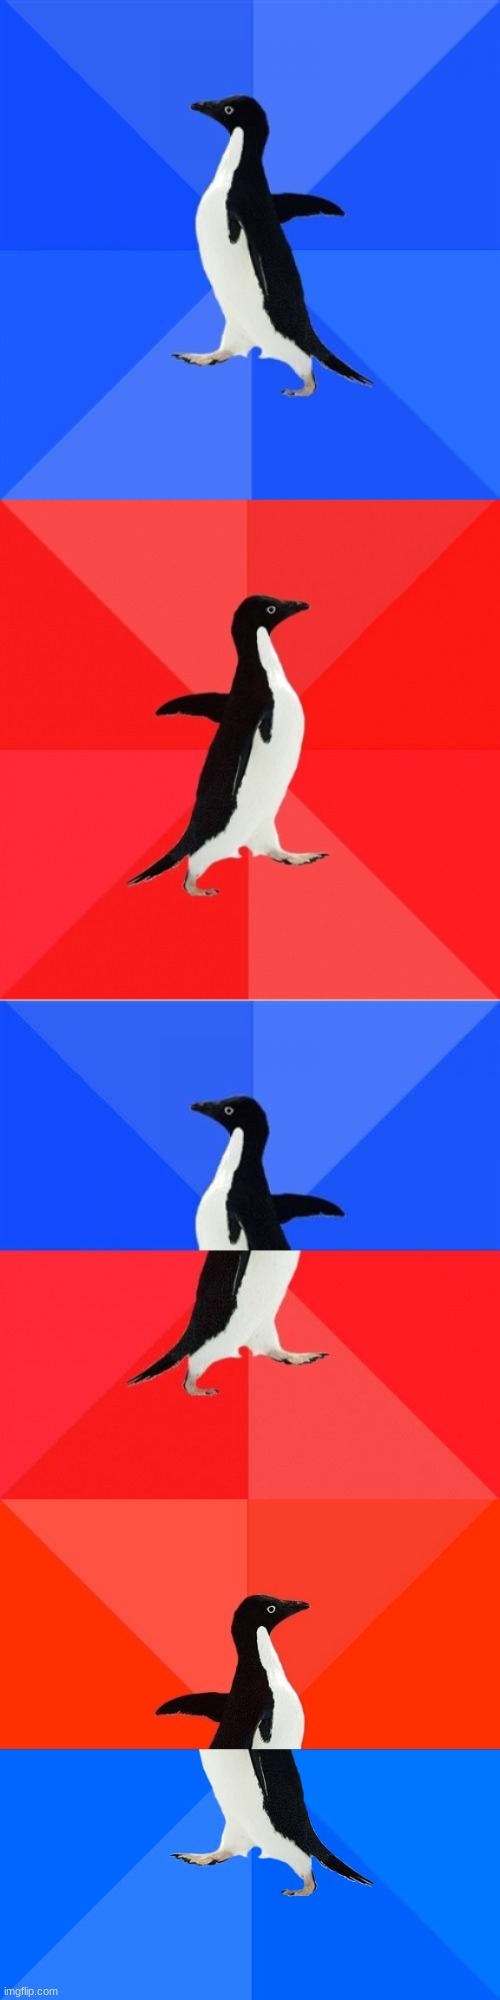 Socially awkward penguin | image tagged in memes,socially awesome penguin,socially awkward penguin,socially awesome awkward penguin,socially awkward awesome penguin | made w/ Imgflip meme maker